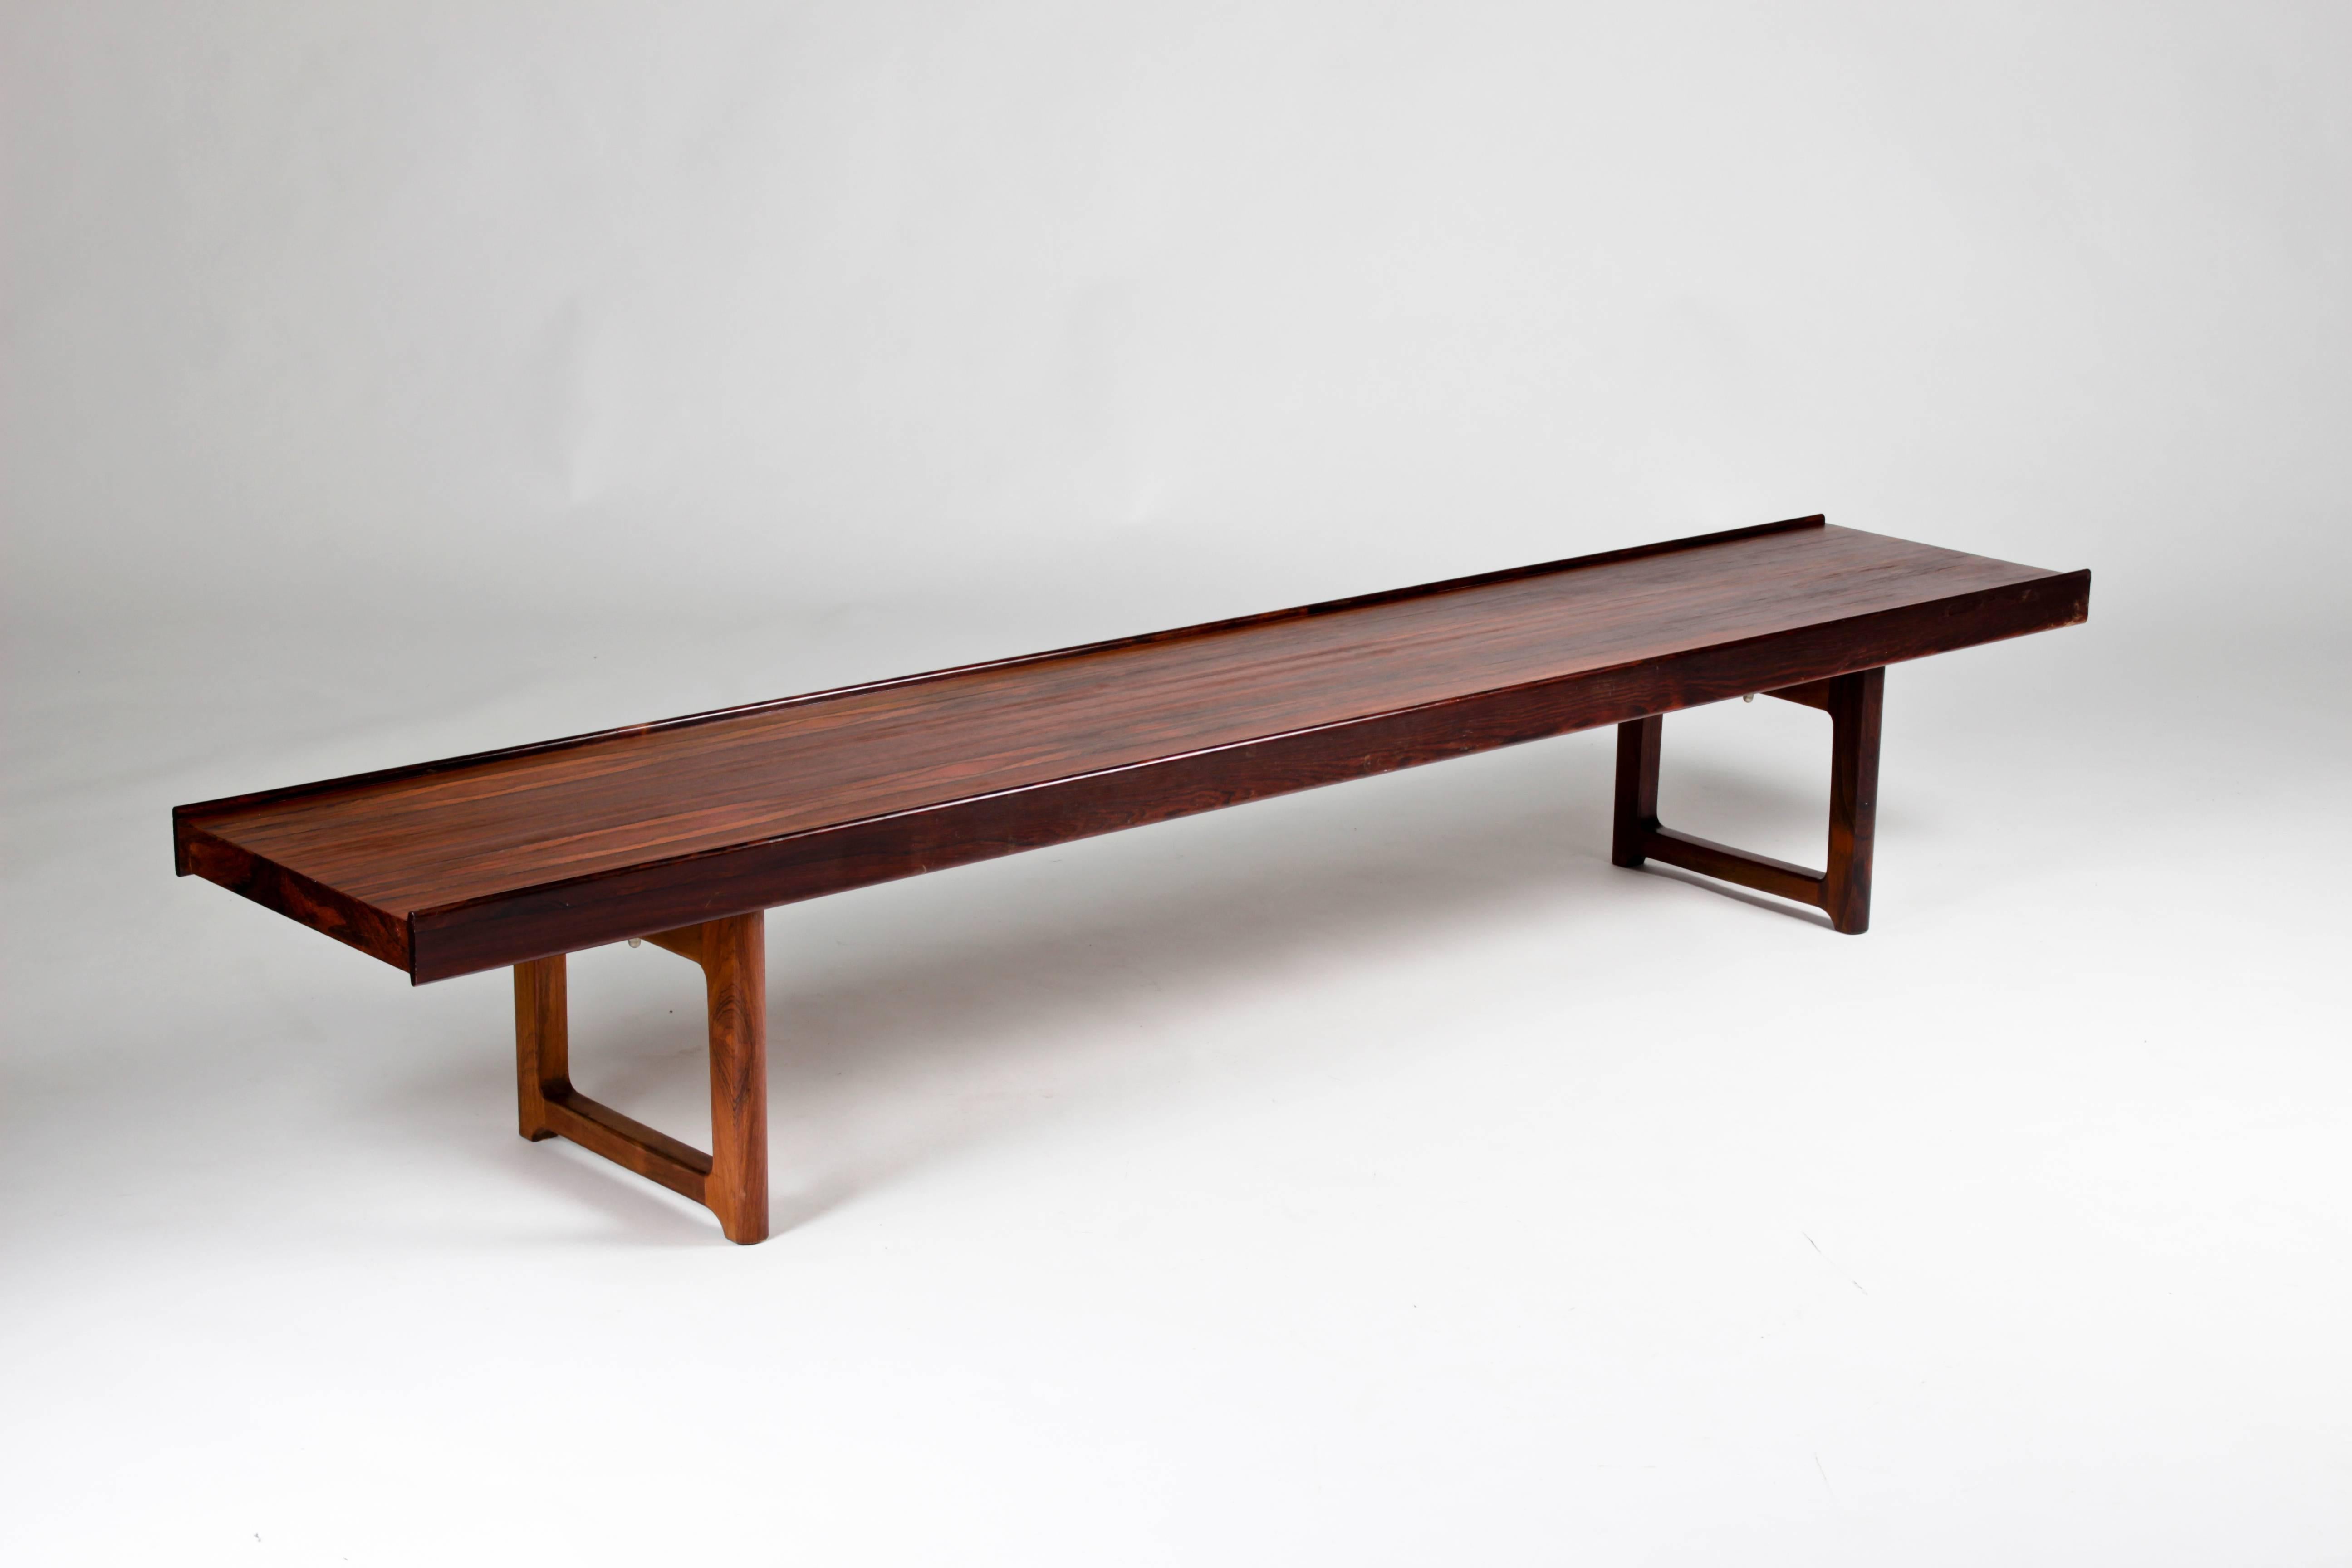 Krobo bench in rosewood by Torbjørn Afdal for Mellemstrand, Norway.
Condiotion: Very good restored condition, slightly bleached by the sun. 